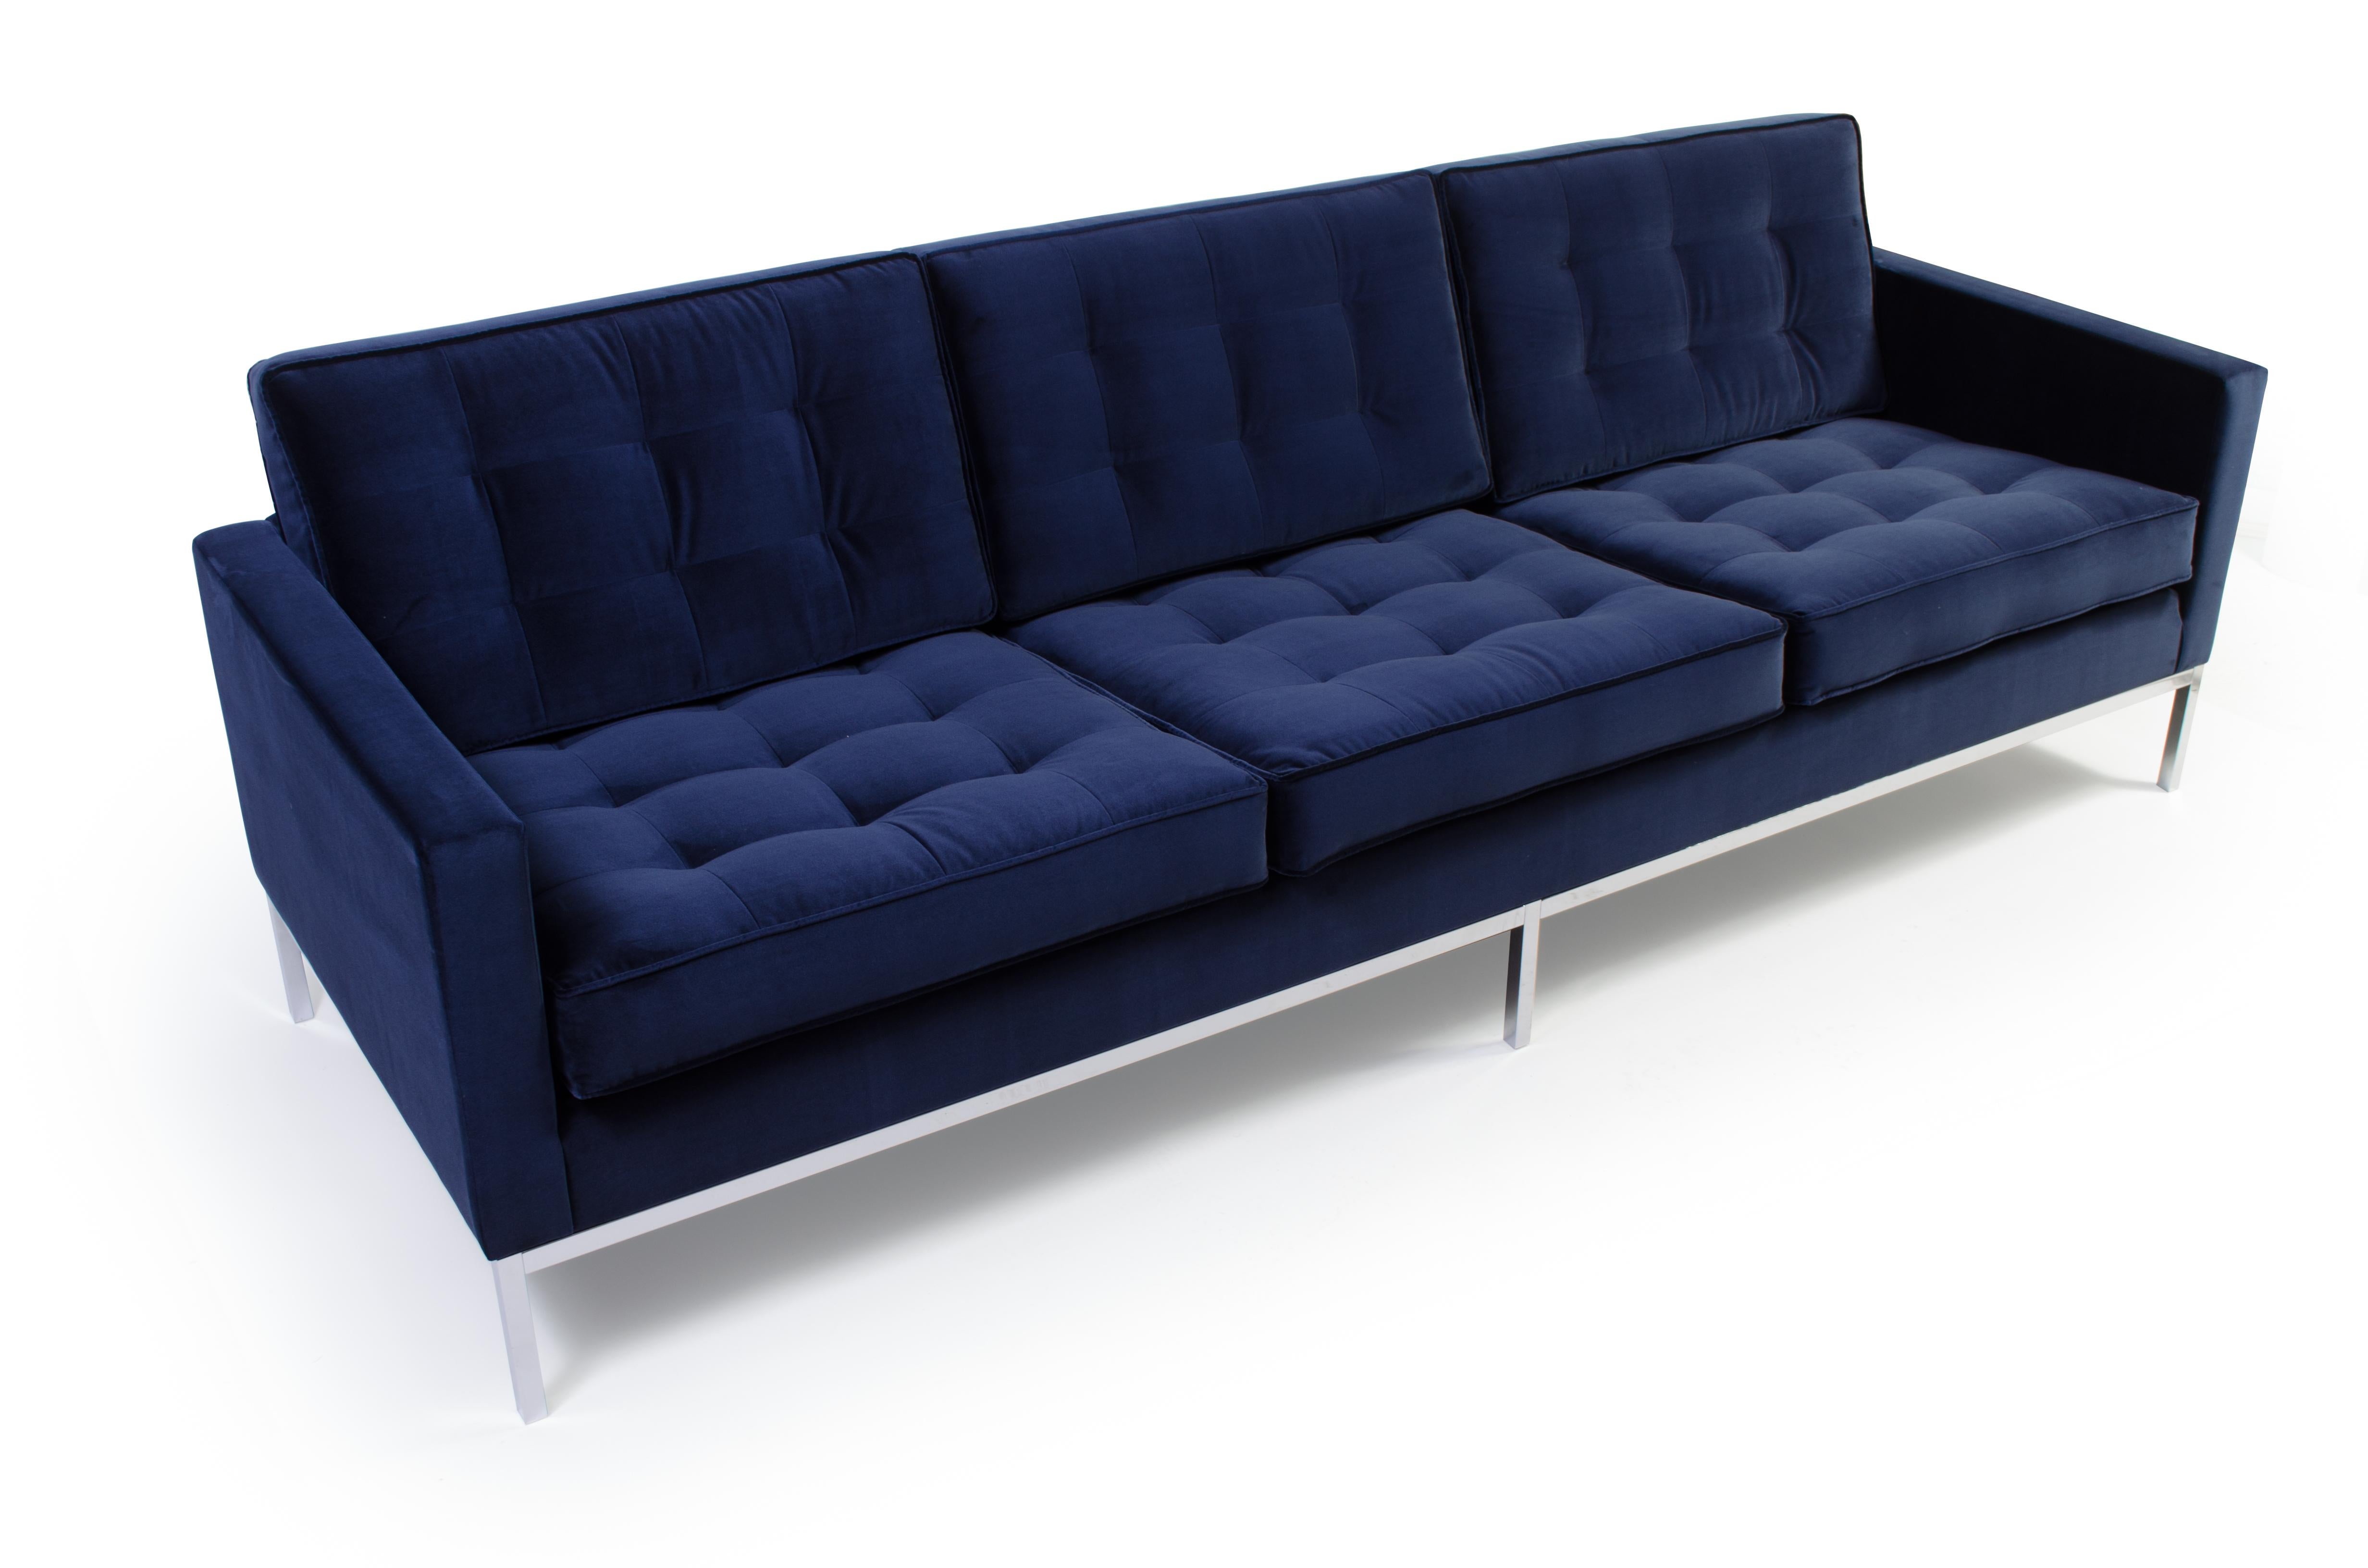 This classic Florence Knoll Sofa, a quintessential piece of mid-century design, is the ultimate statement of style, elegance and comfort with its clean lines and exemplary proportions. Newly reupholstered in rich Italian Navy velvet, Knoll's iconic